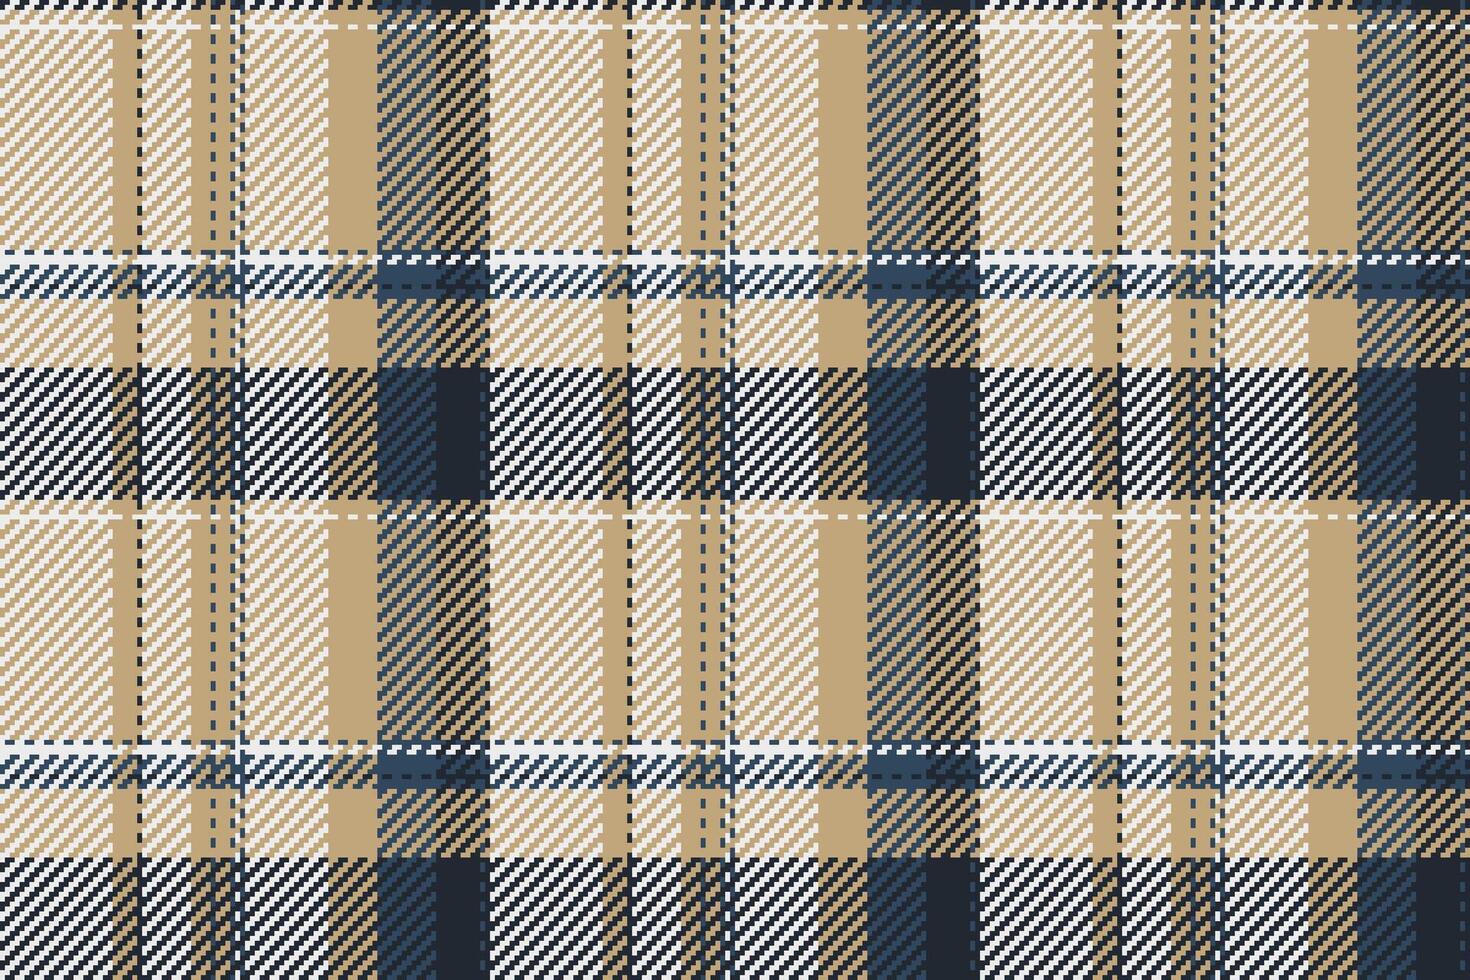 Menswear pattern seamless plaid, graphical tartan fabric textile. Summer vector texture background check in amber and white colors.